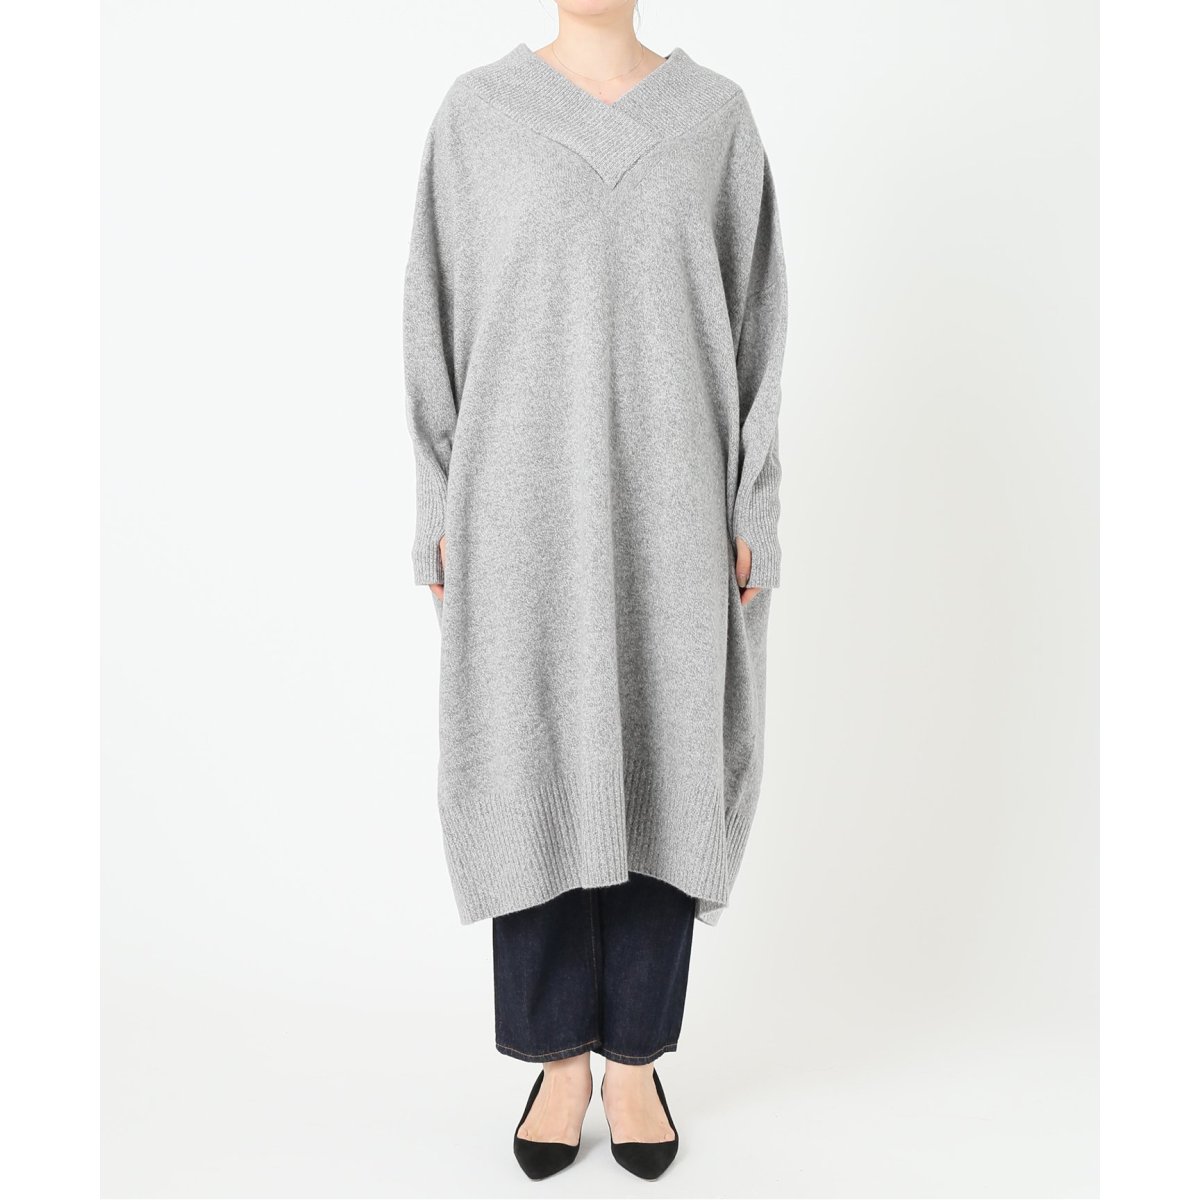 ADAWAS/アダワス】CASHMERE BLENDED ワンピース◇ | イエナ(IENA 